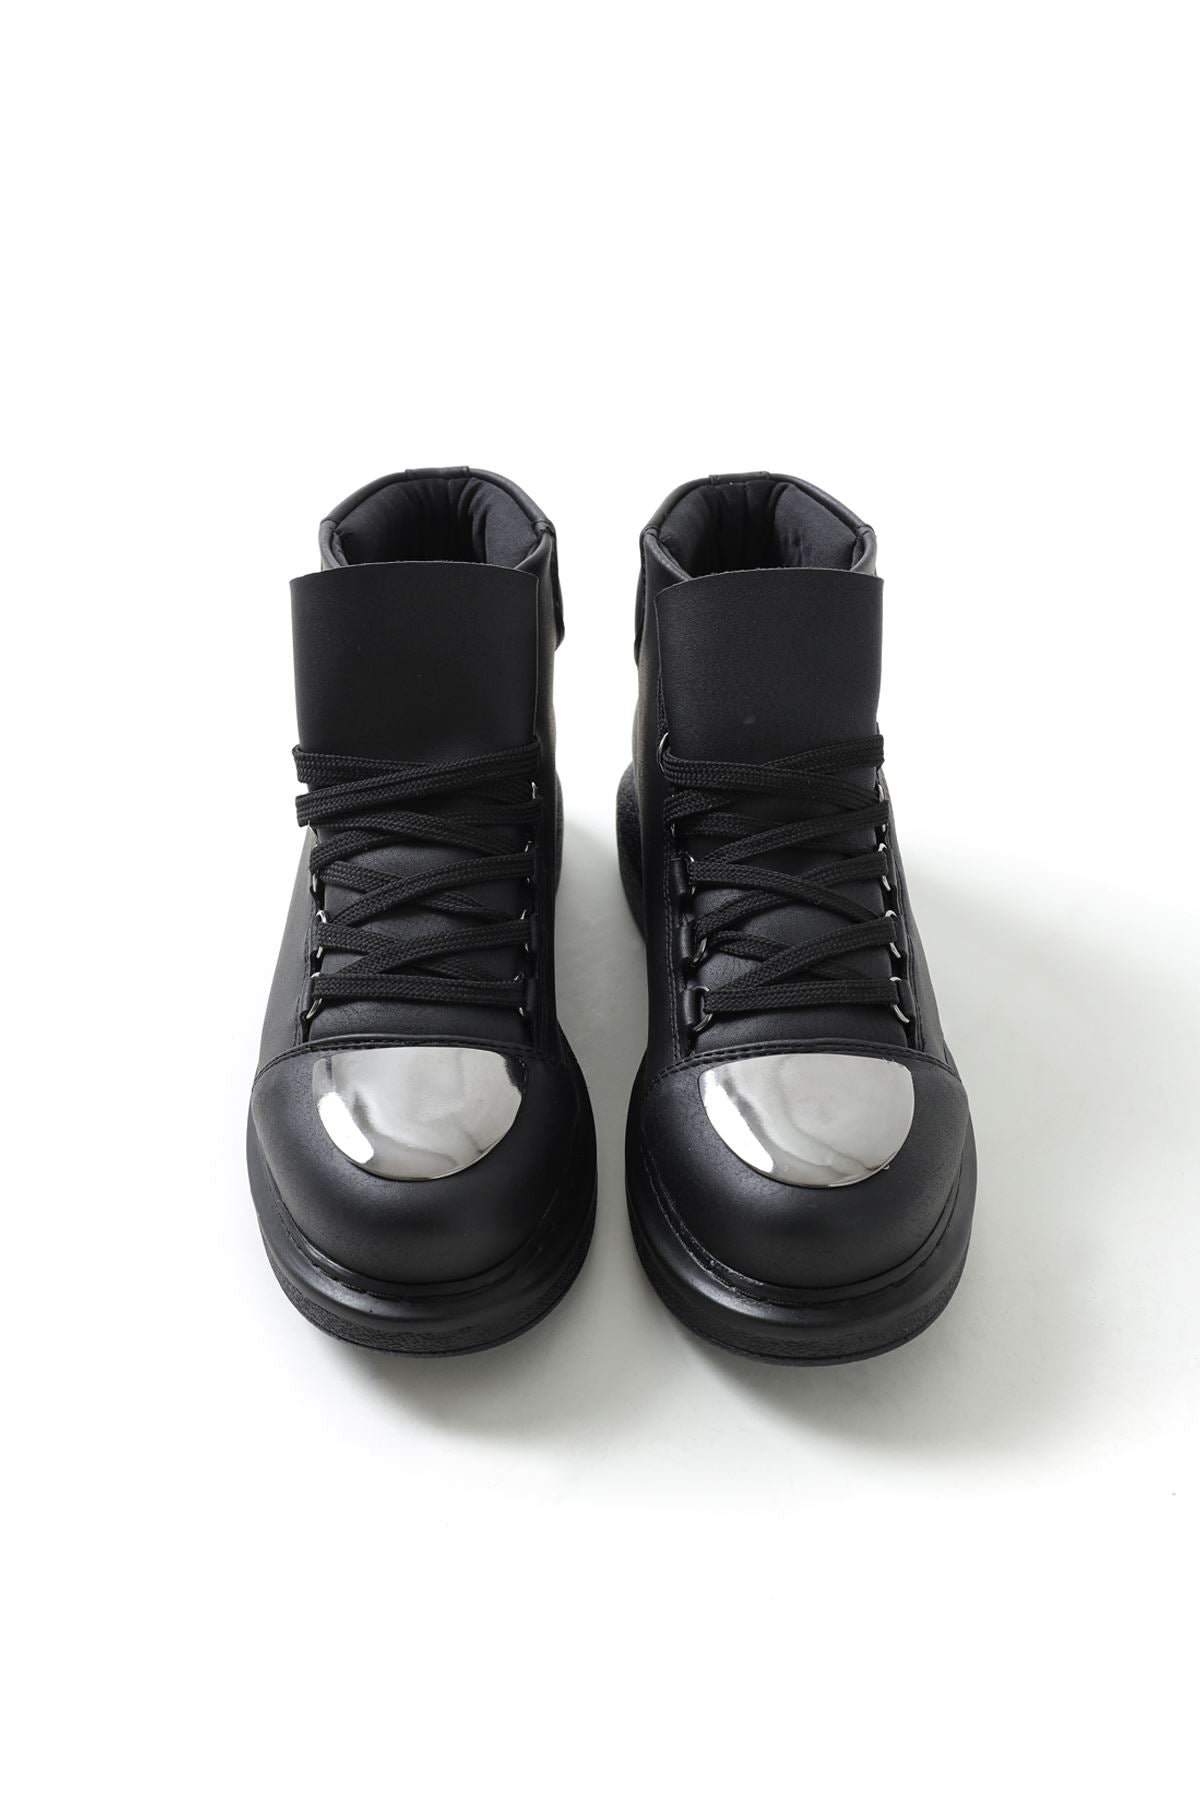 CH267 ST Women's Boots BLACK - STREETMODE ™